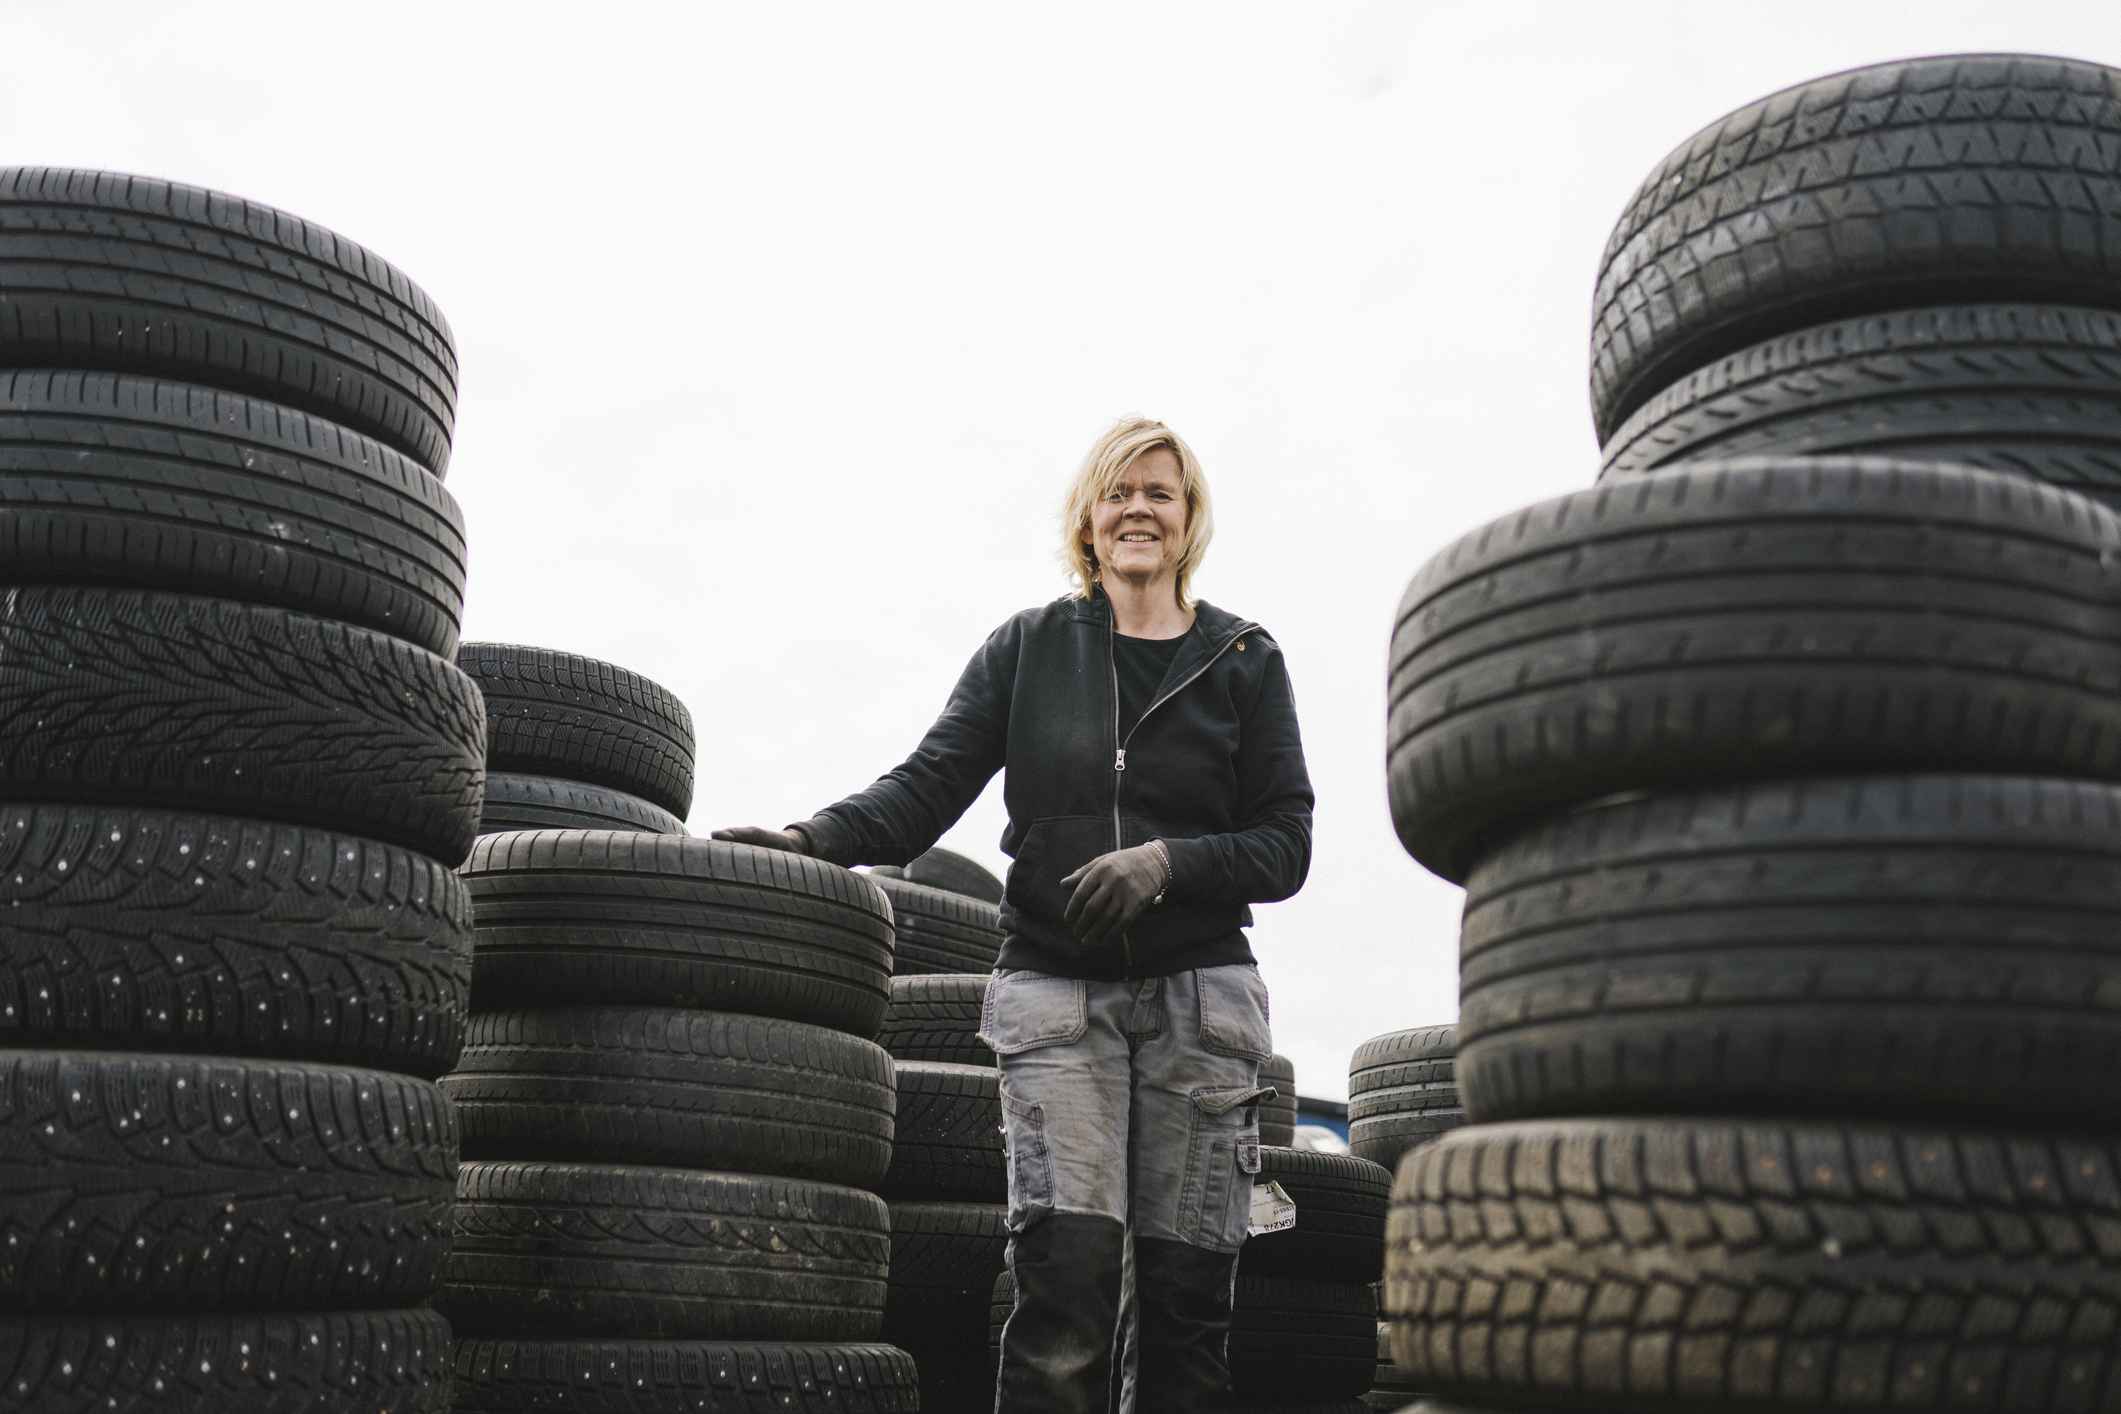 Woman standing between stacks of tires at a workshop, smiling, dressed in work attire